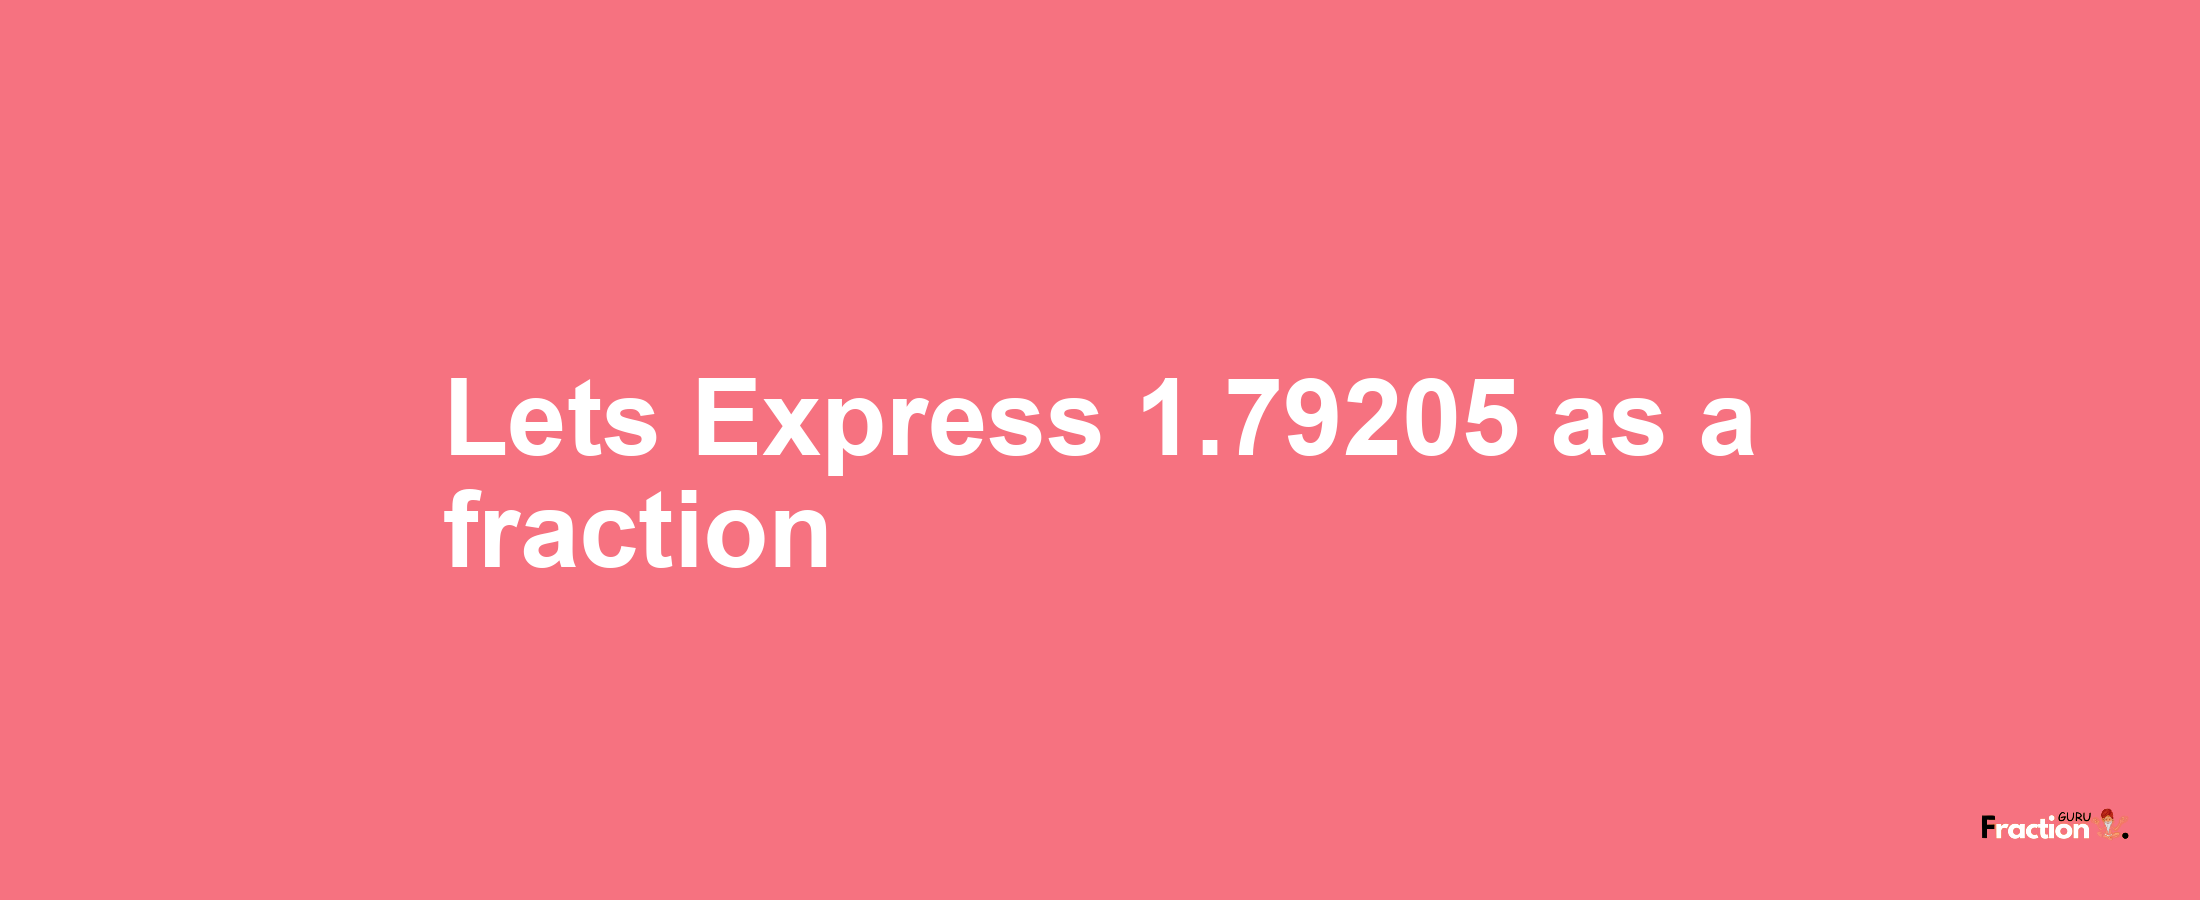 Lets Express 1.79205 as afraction